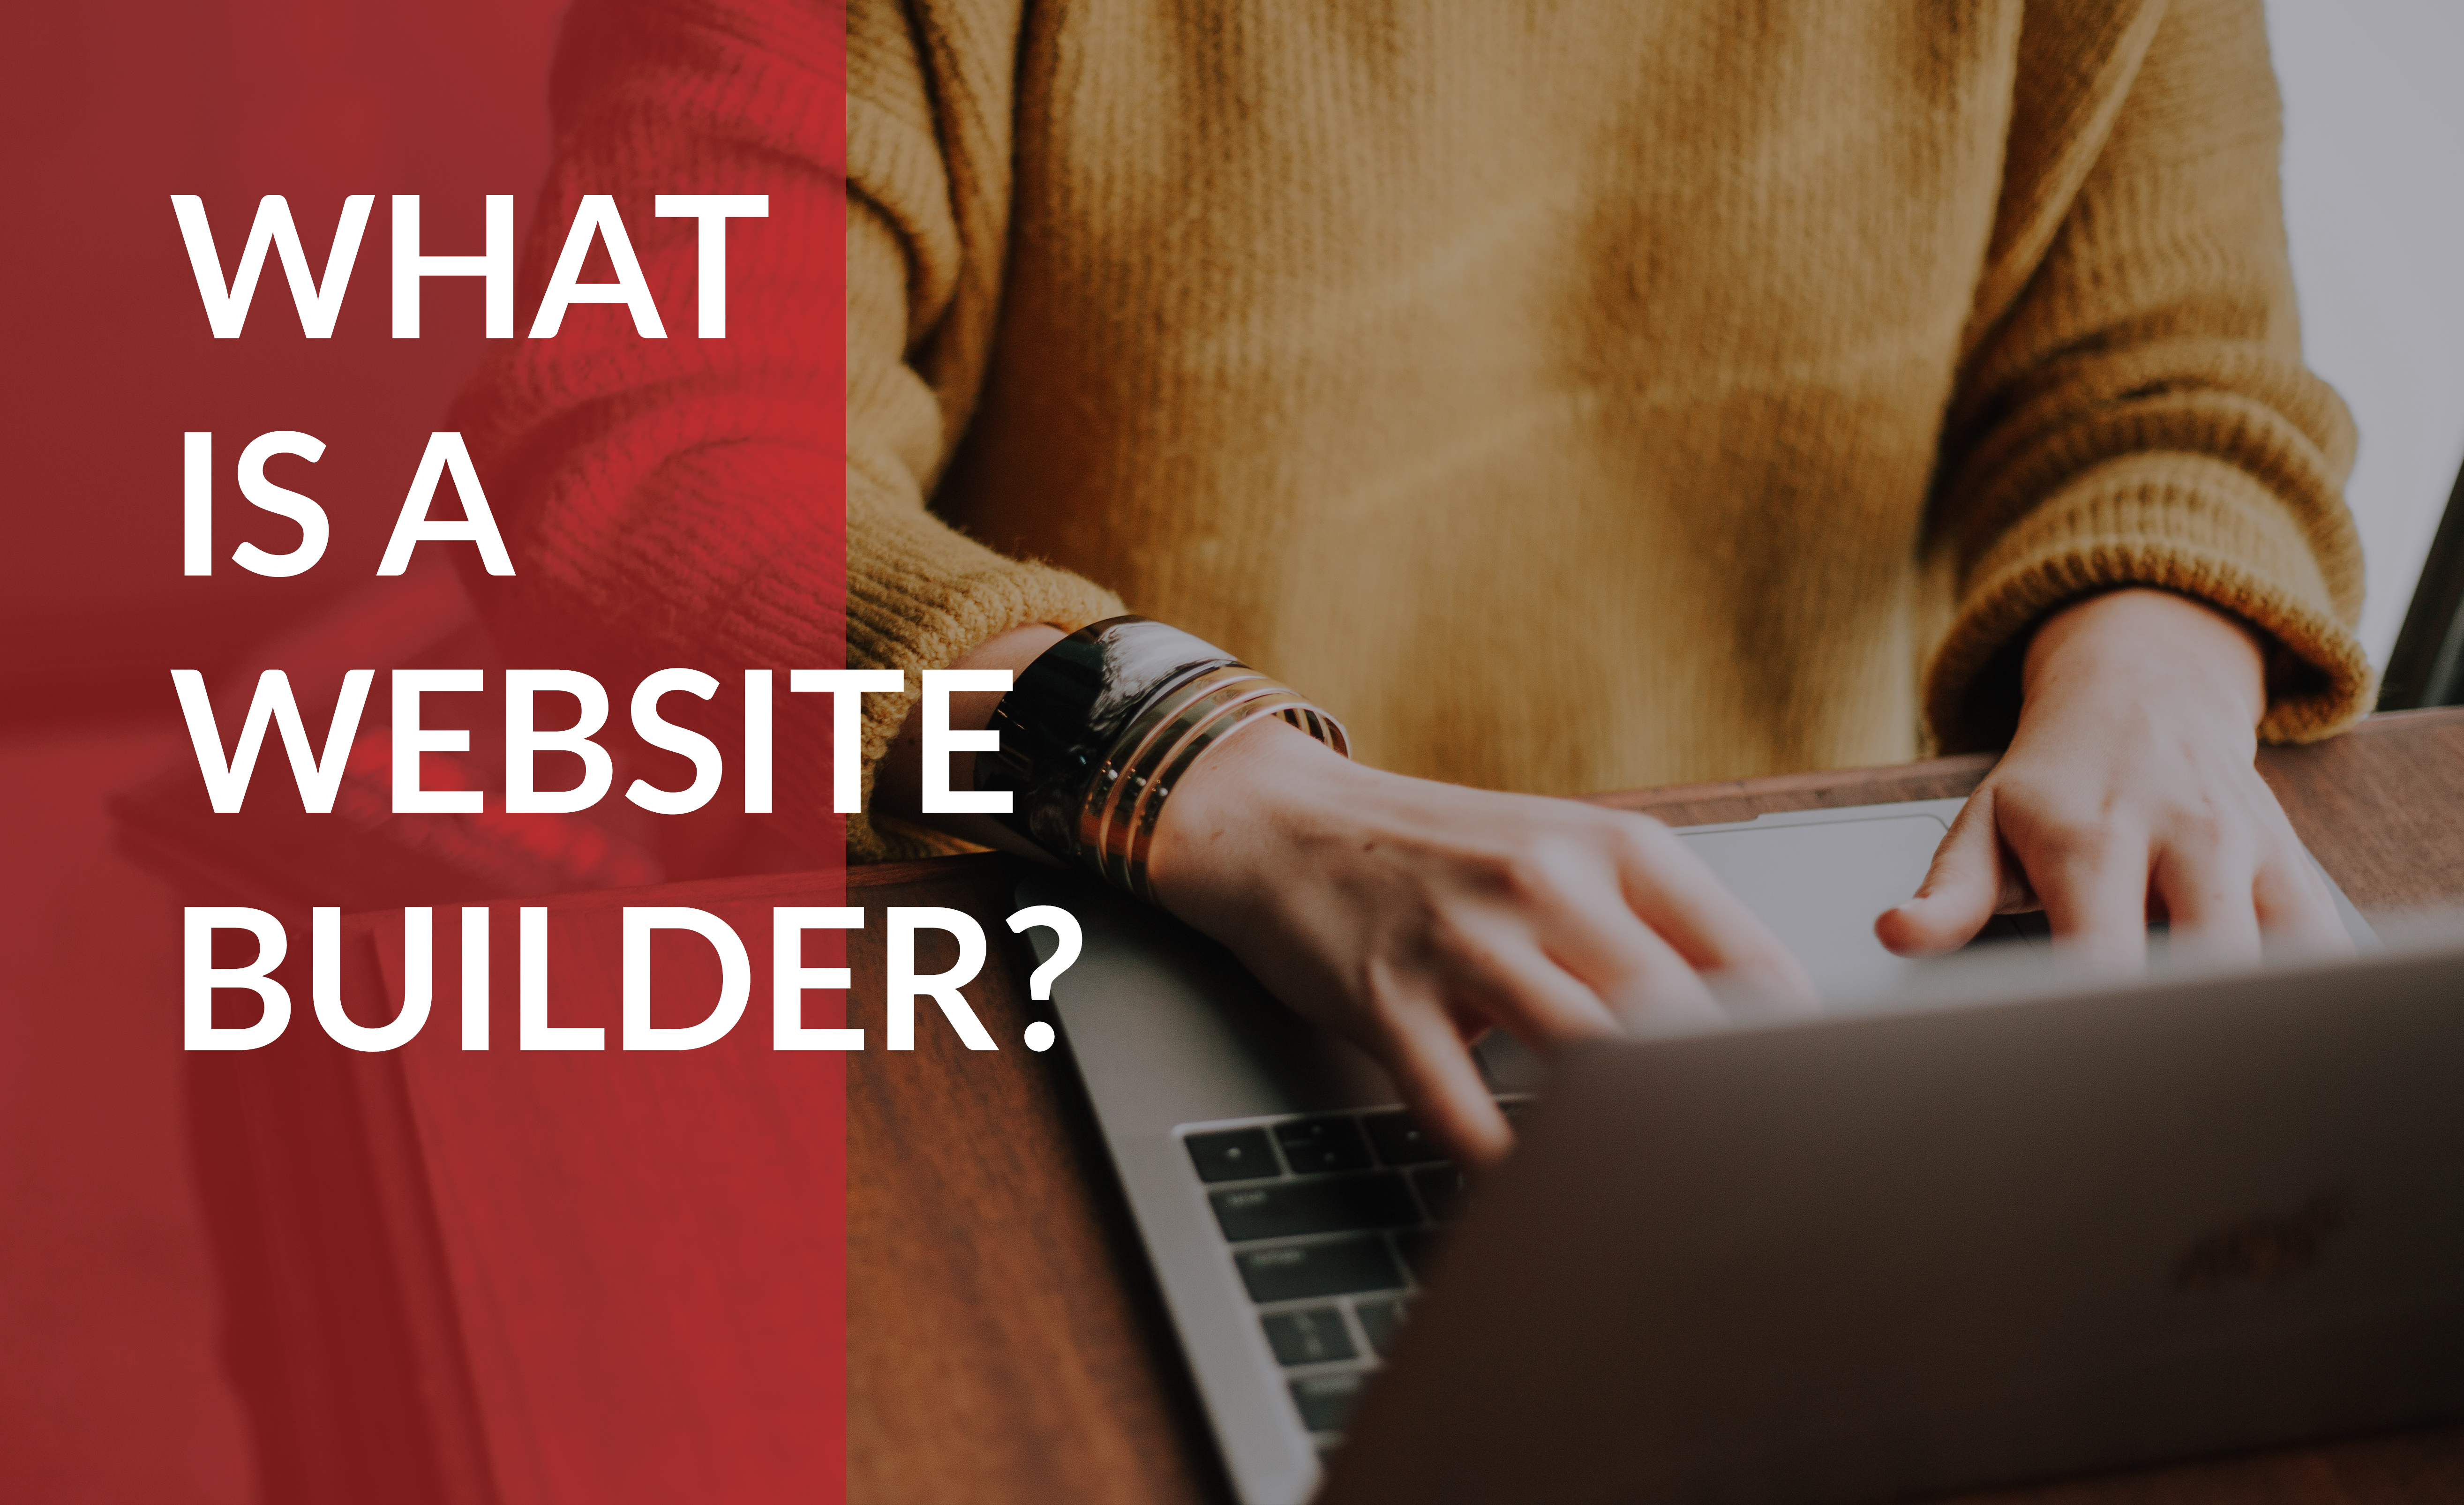 What is a website builder?